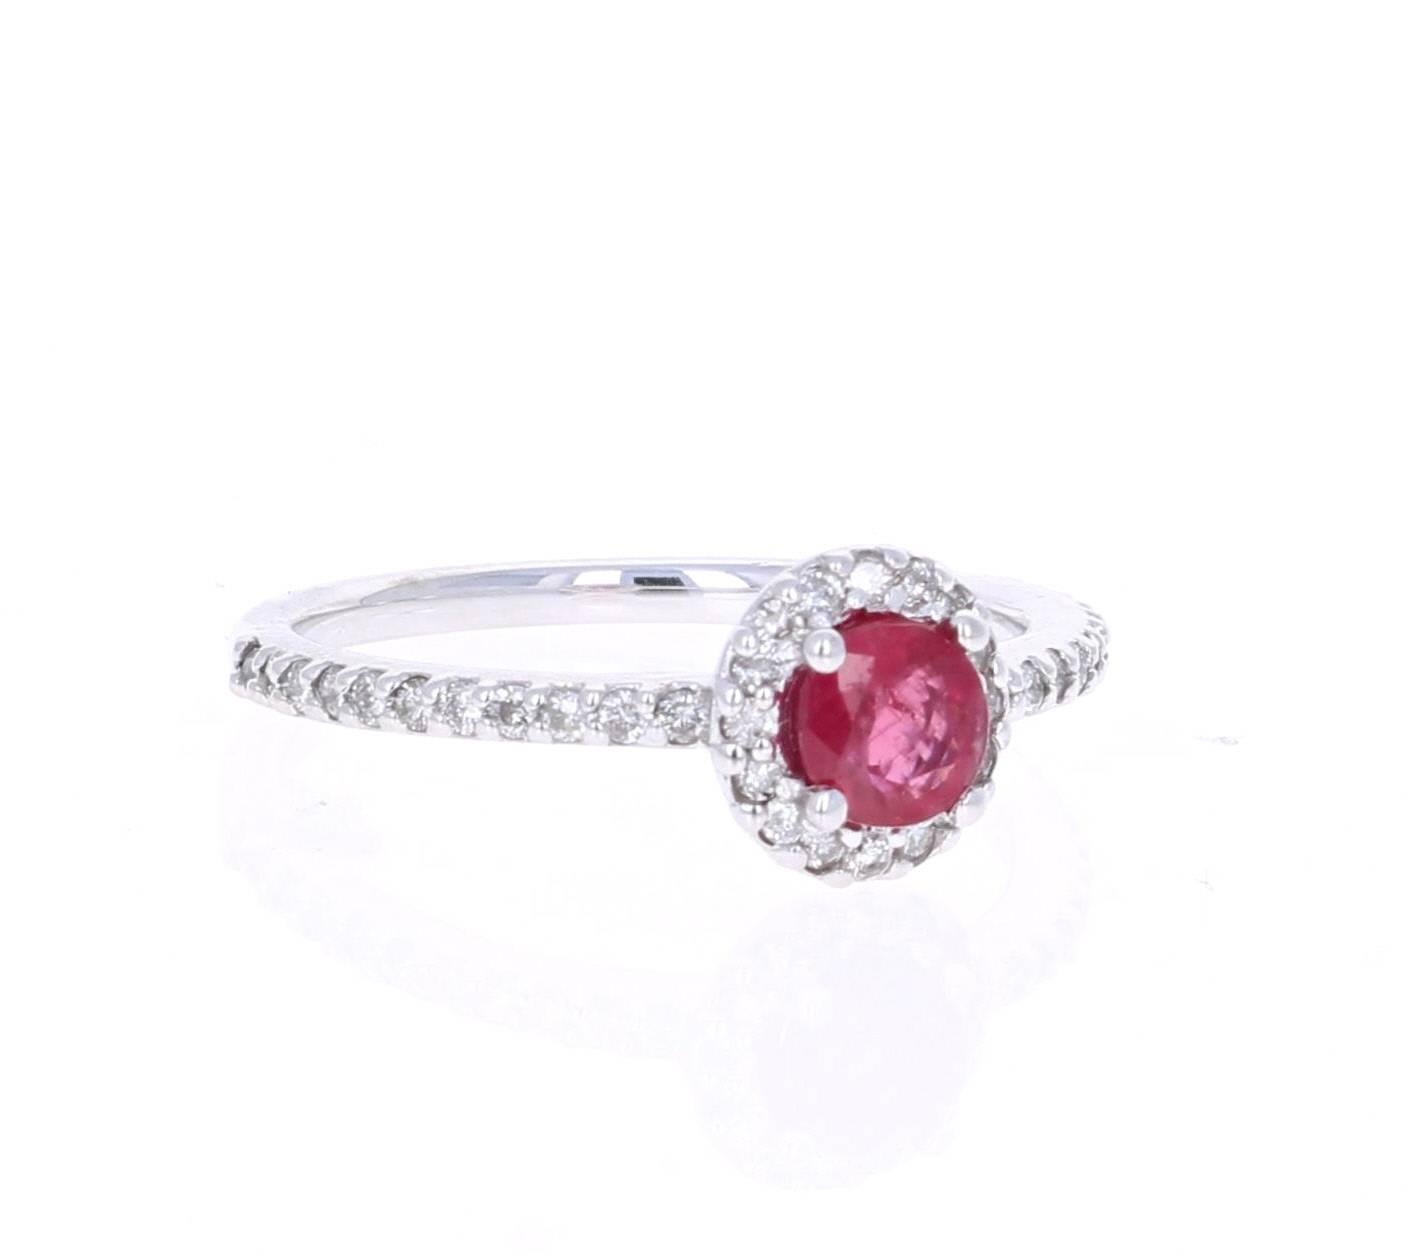 This elegant and dainty Ruby Diamond Ring can be a modern Engagement/Promise ring. It has a Round Cut Ruby that is 0.64 carats with a flow of 38 Round Cut Diamonds weighing 0.35 carats.  The total carat weight of the ring is 0.99 carats. It is set